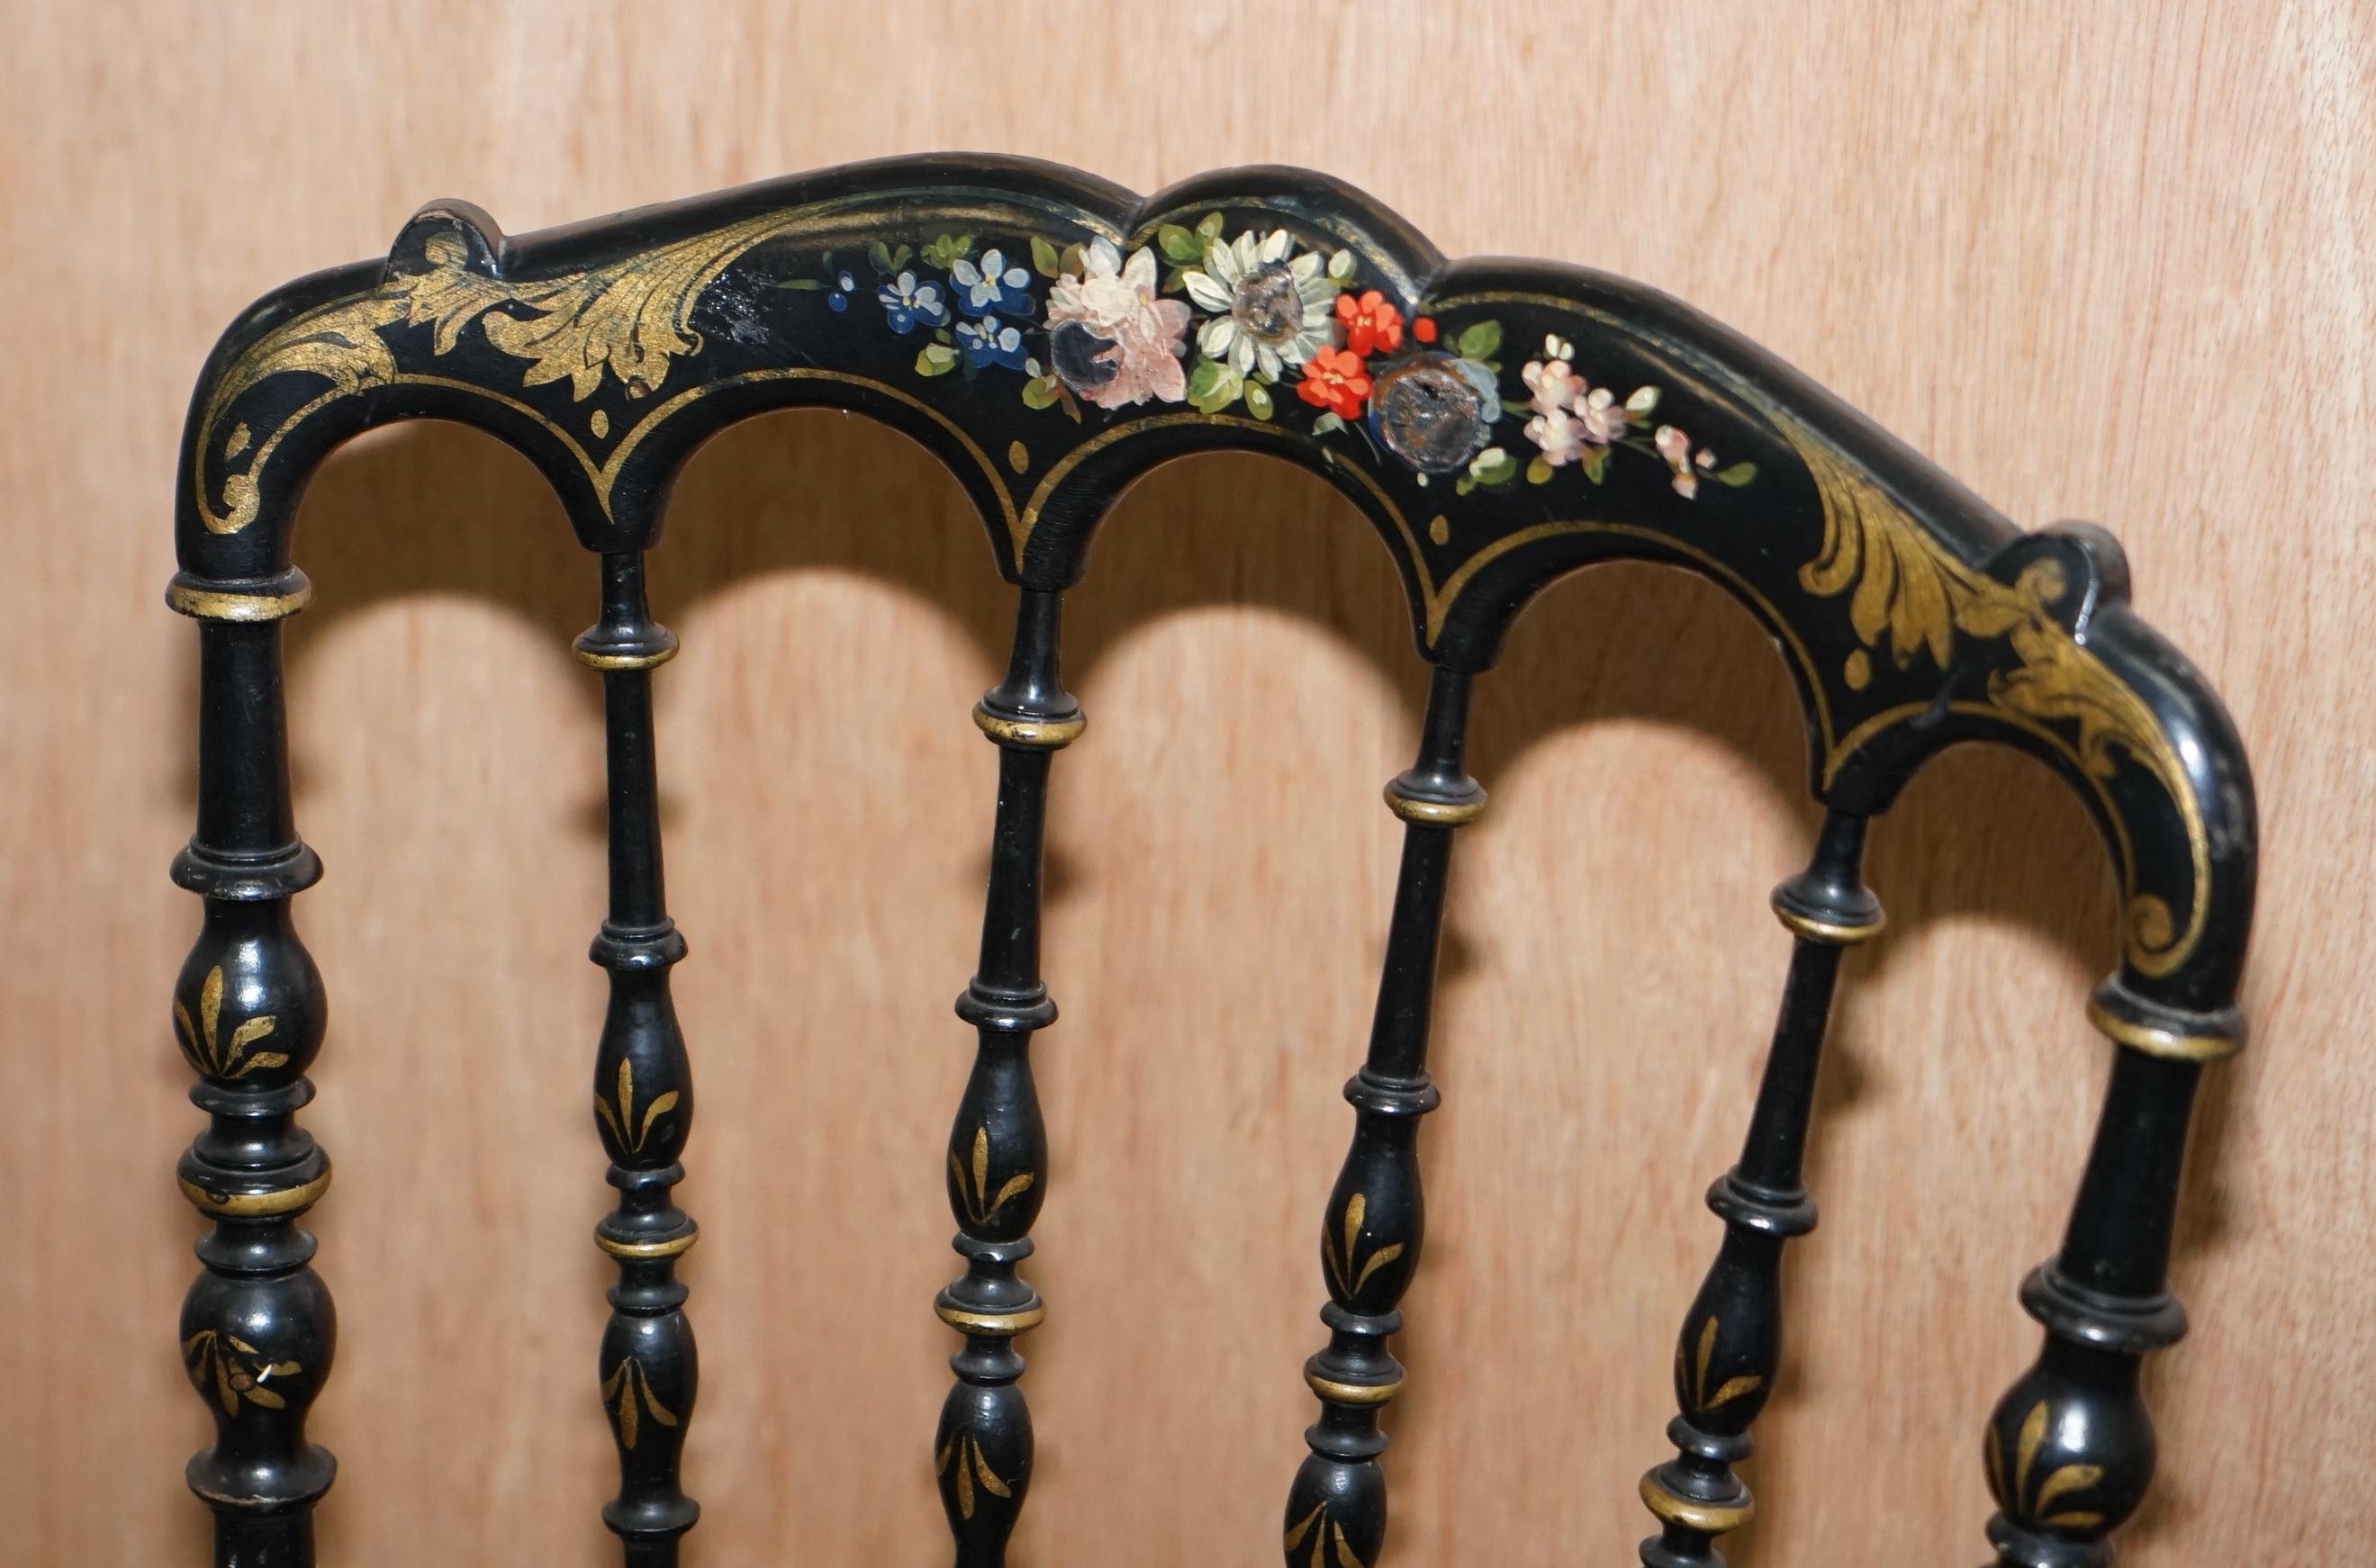 Rare Pair of Regency Floral Hand Painted Ornate Chinoiserie Ebonized Chairs 11